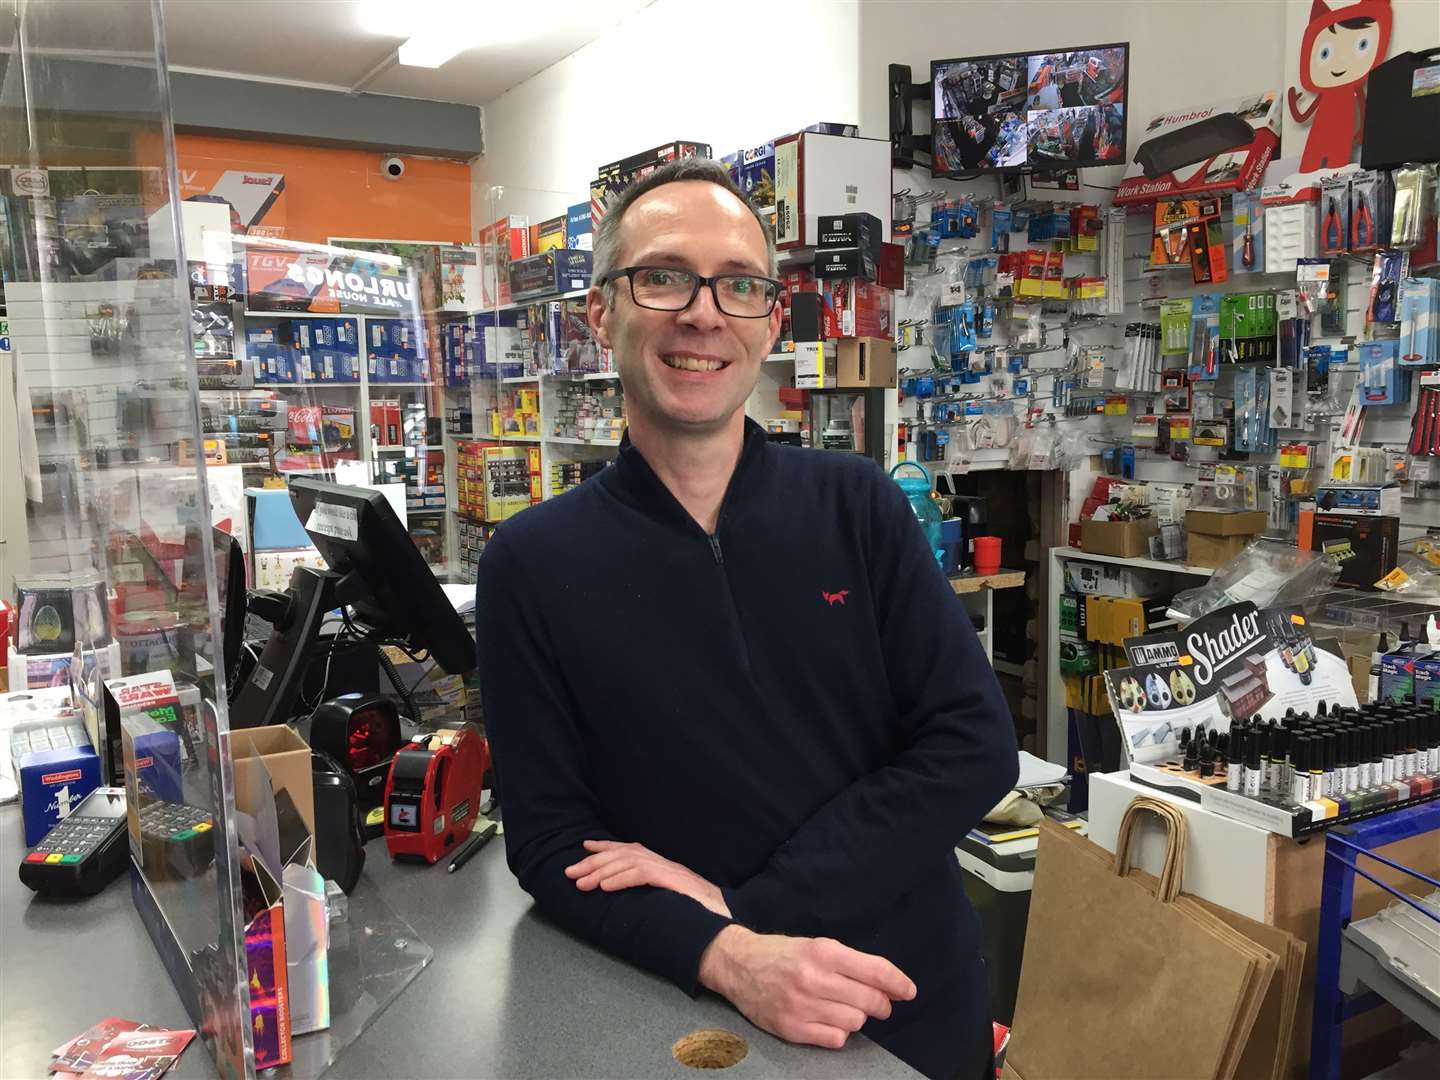 Harvey Alexander, 48, who owns The Hobby Shop in Preston Street, says there are “plenty of takeaways of different types”